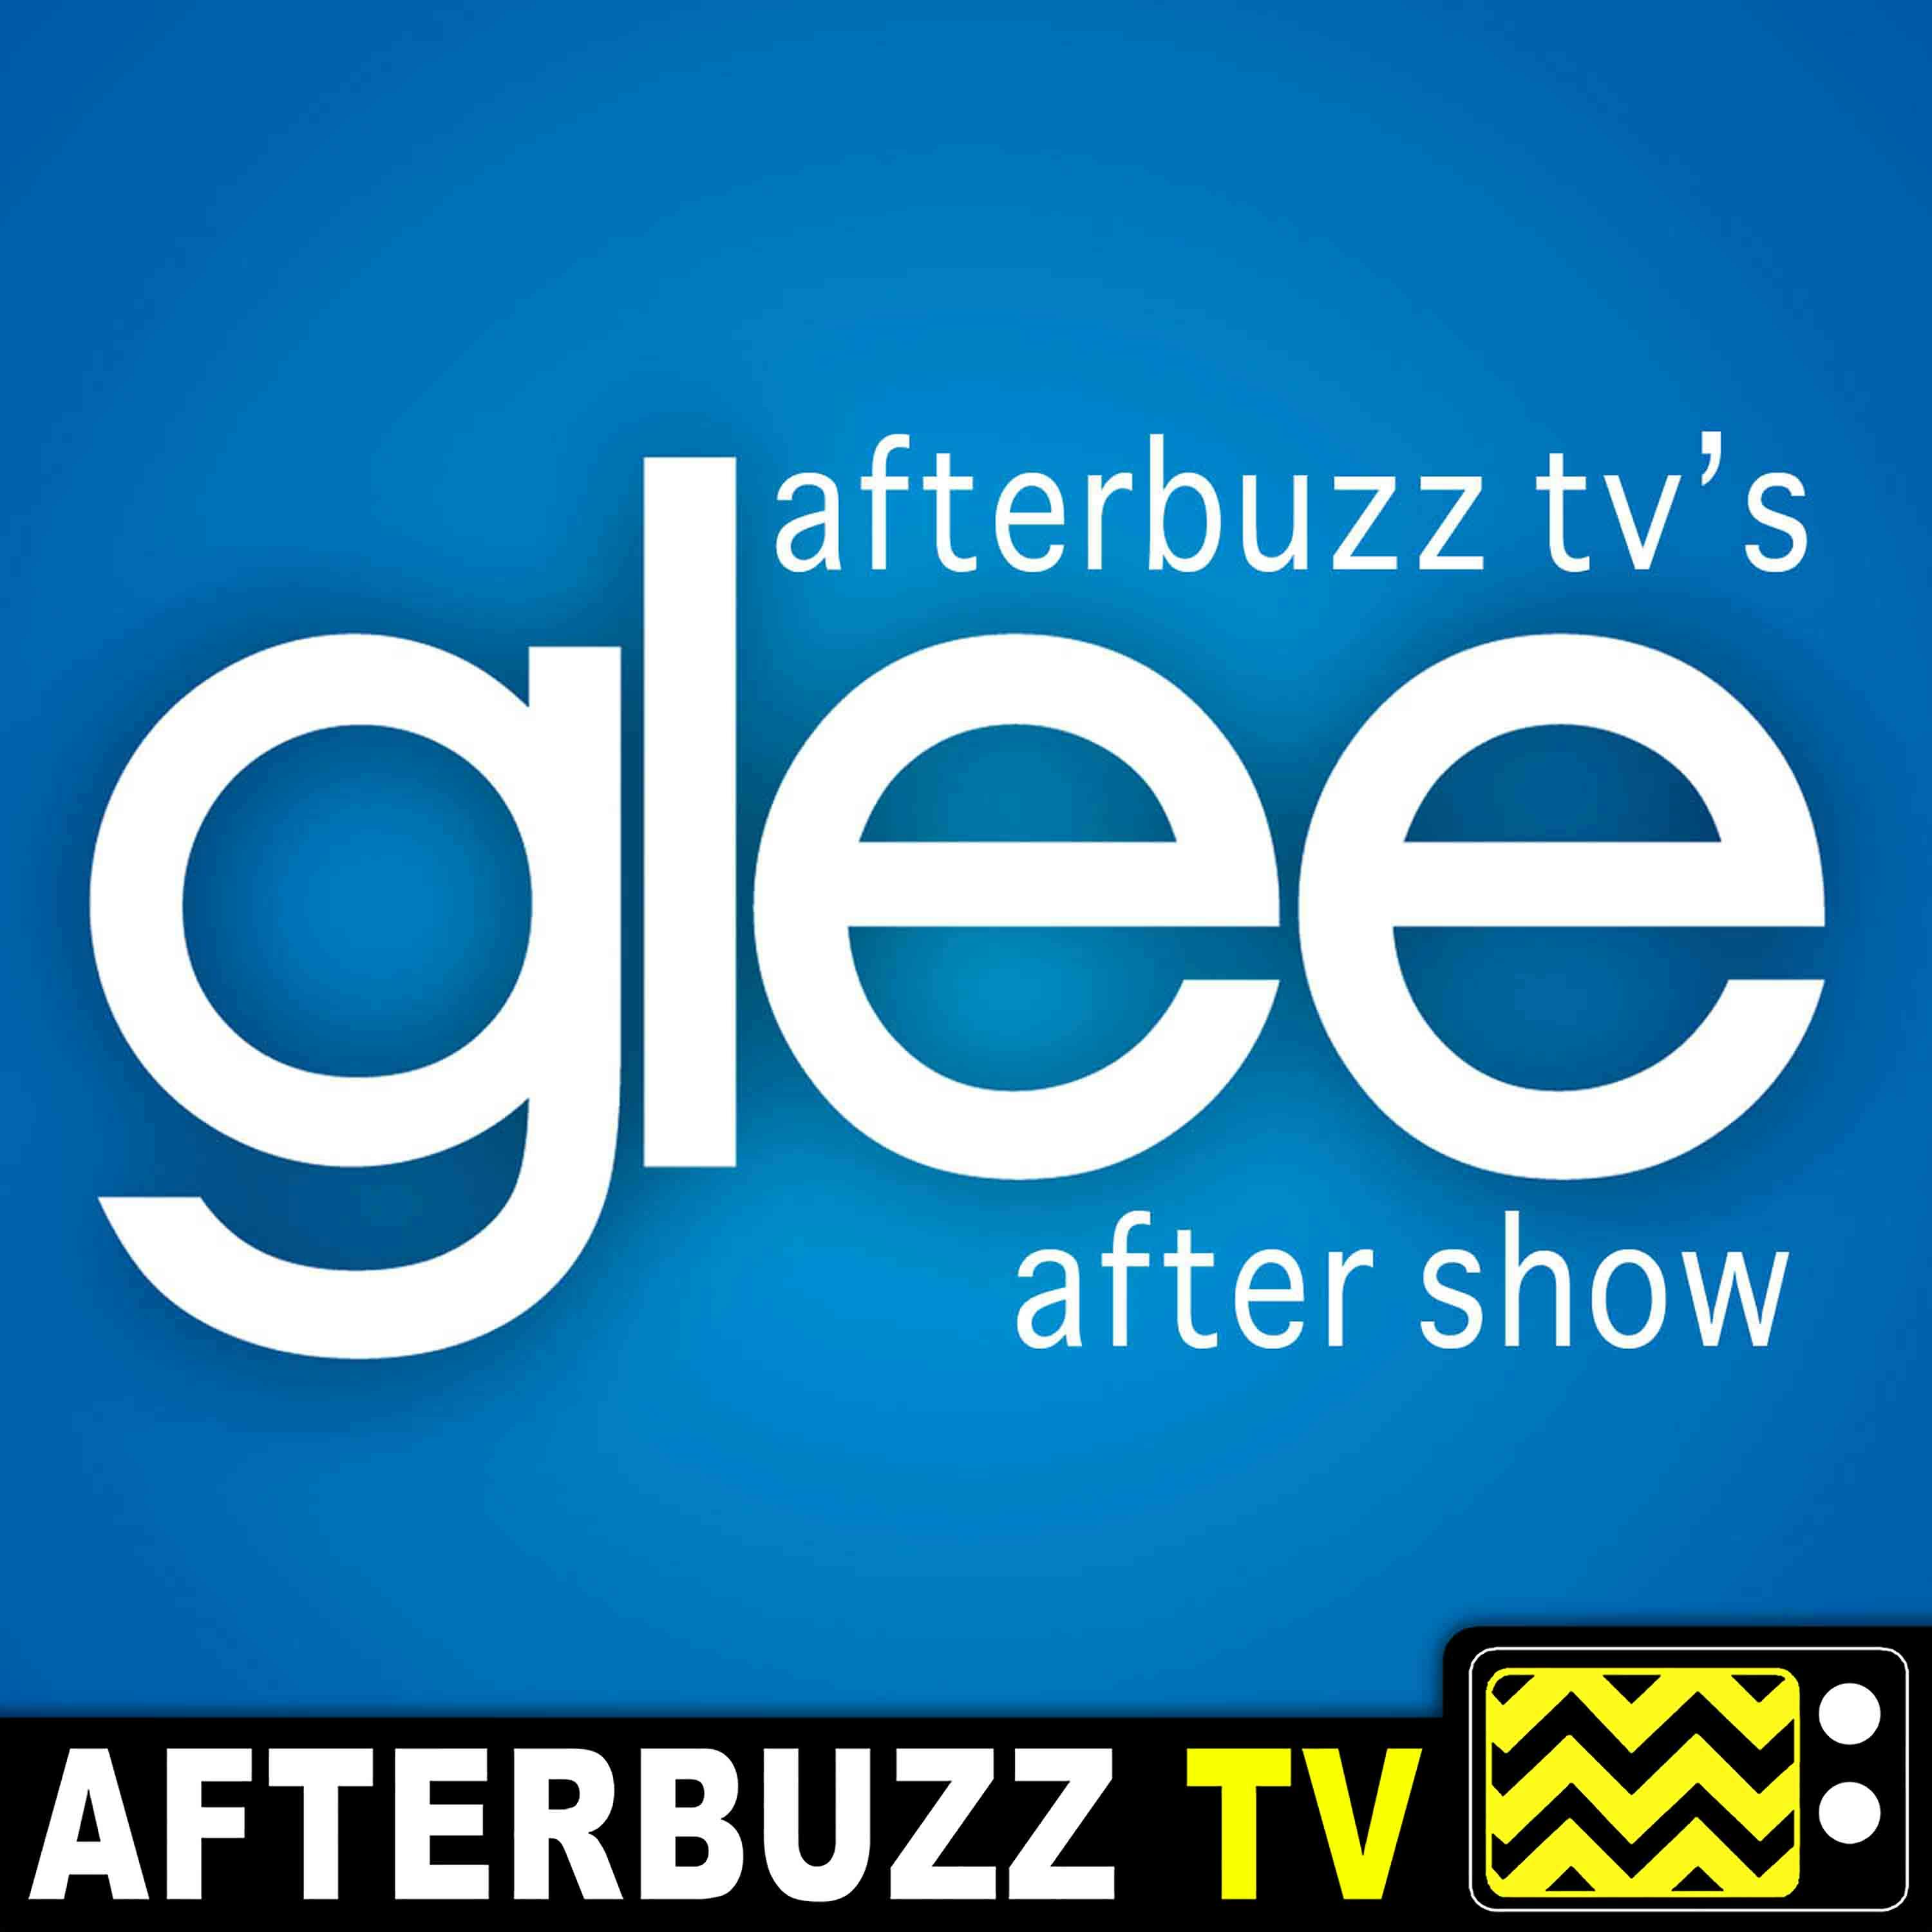 Glee S:6 | Jagged Little Tapestry E:3 | AfterBuzz TV AfterShow